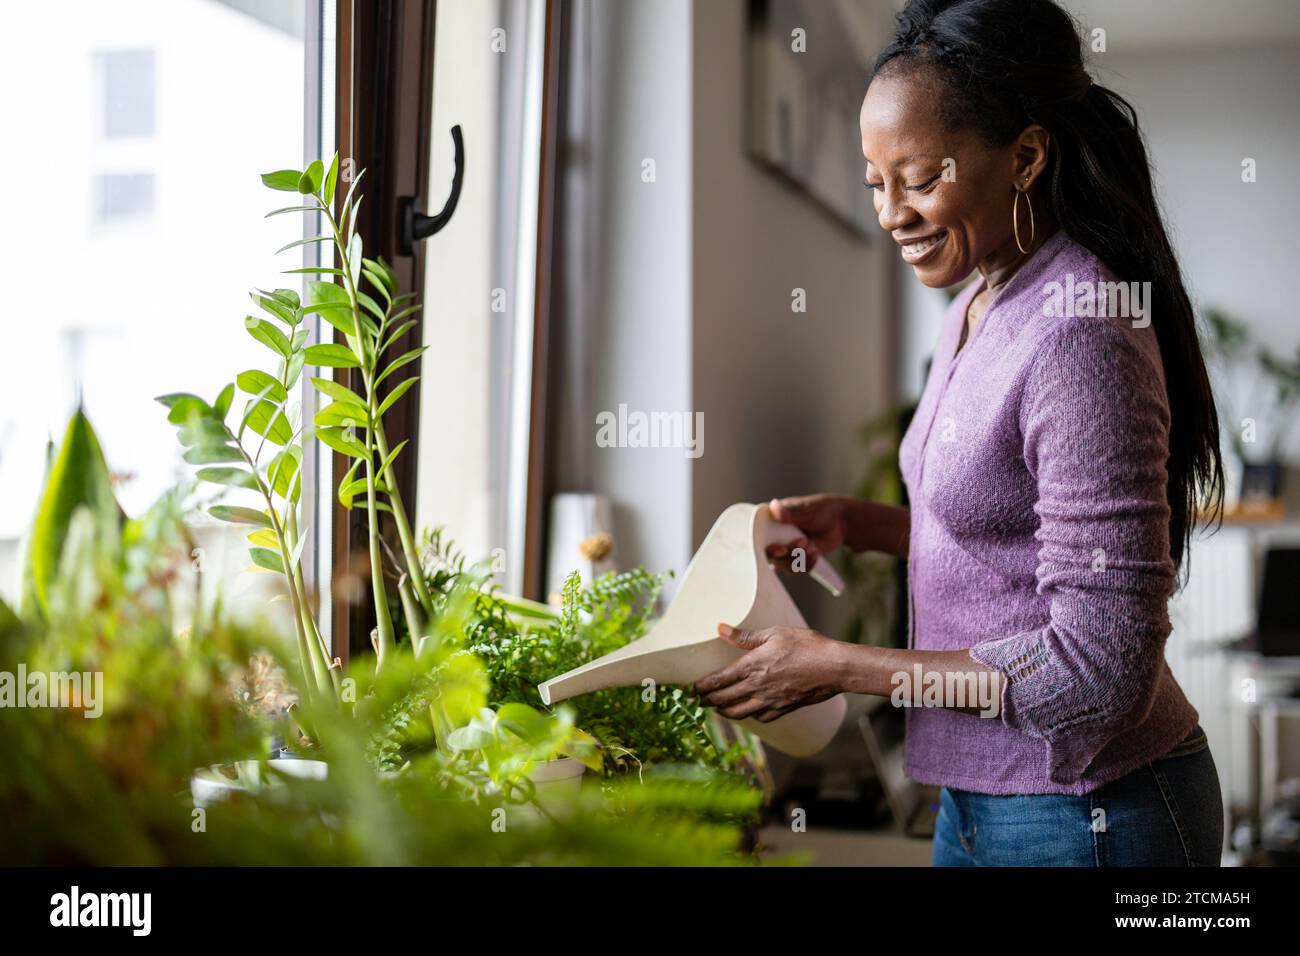 Beautiful woman watering plants at home Stock Photo